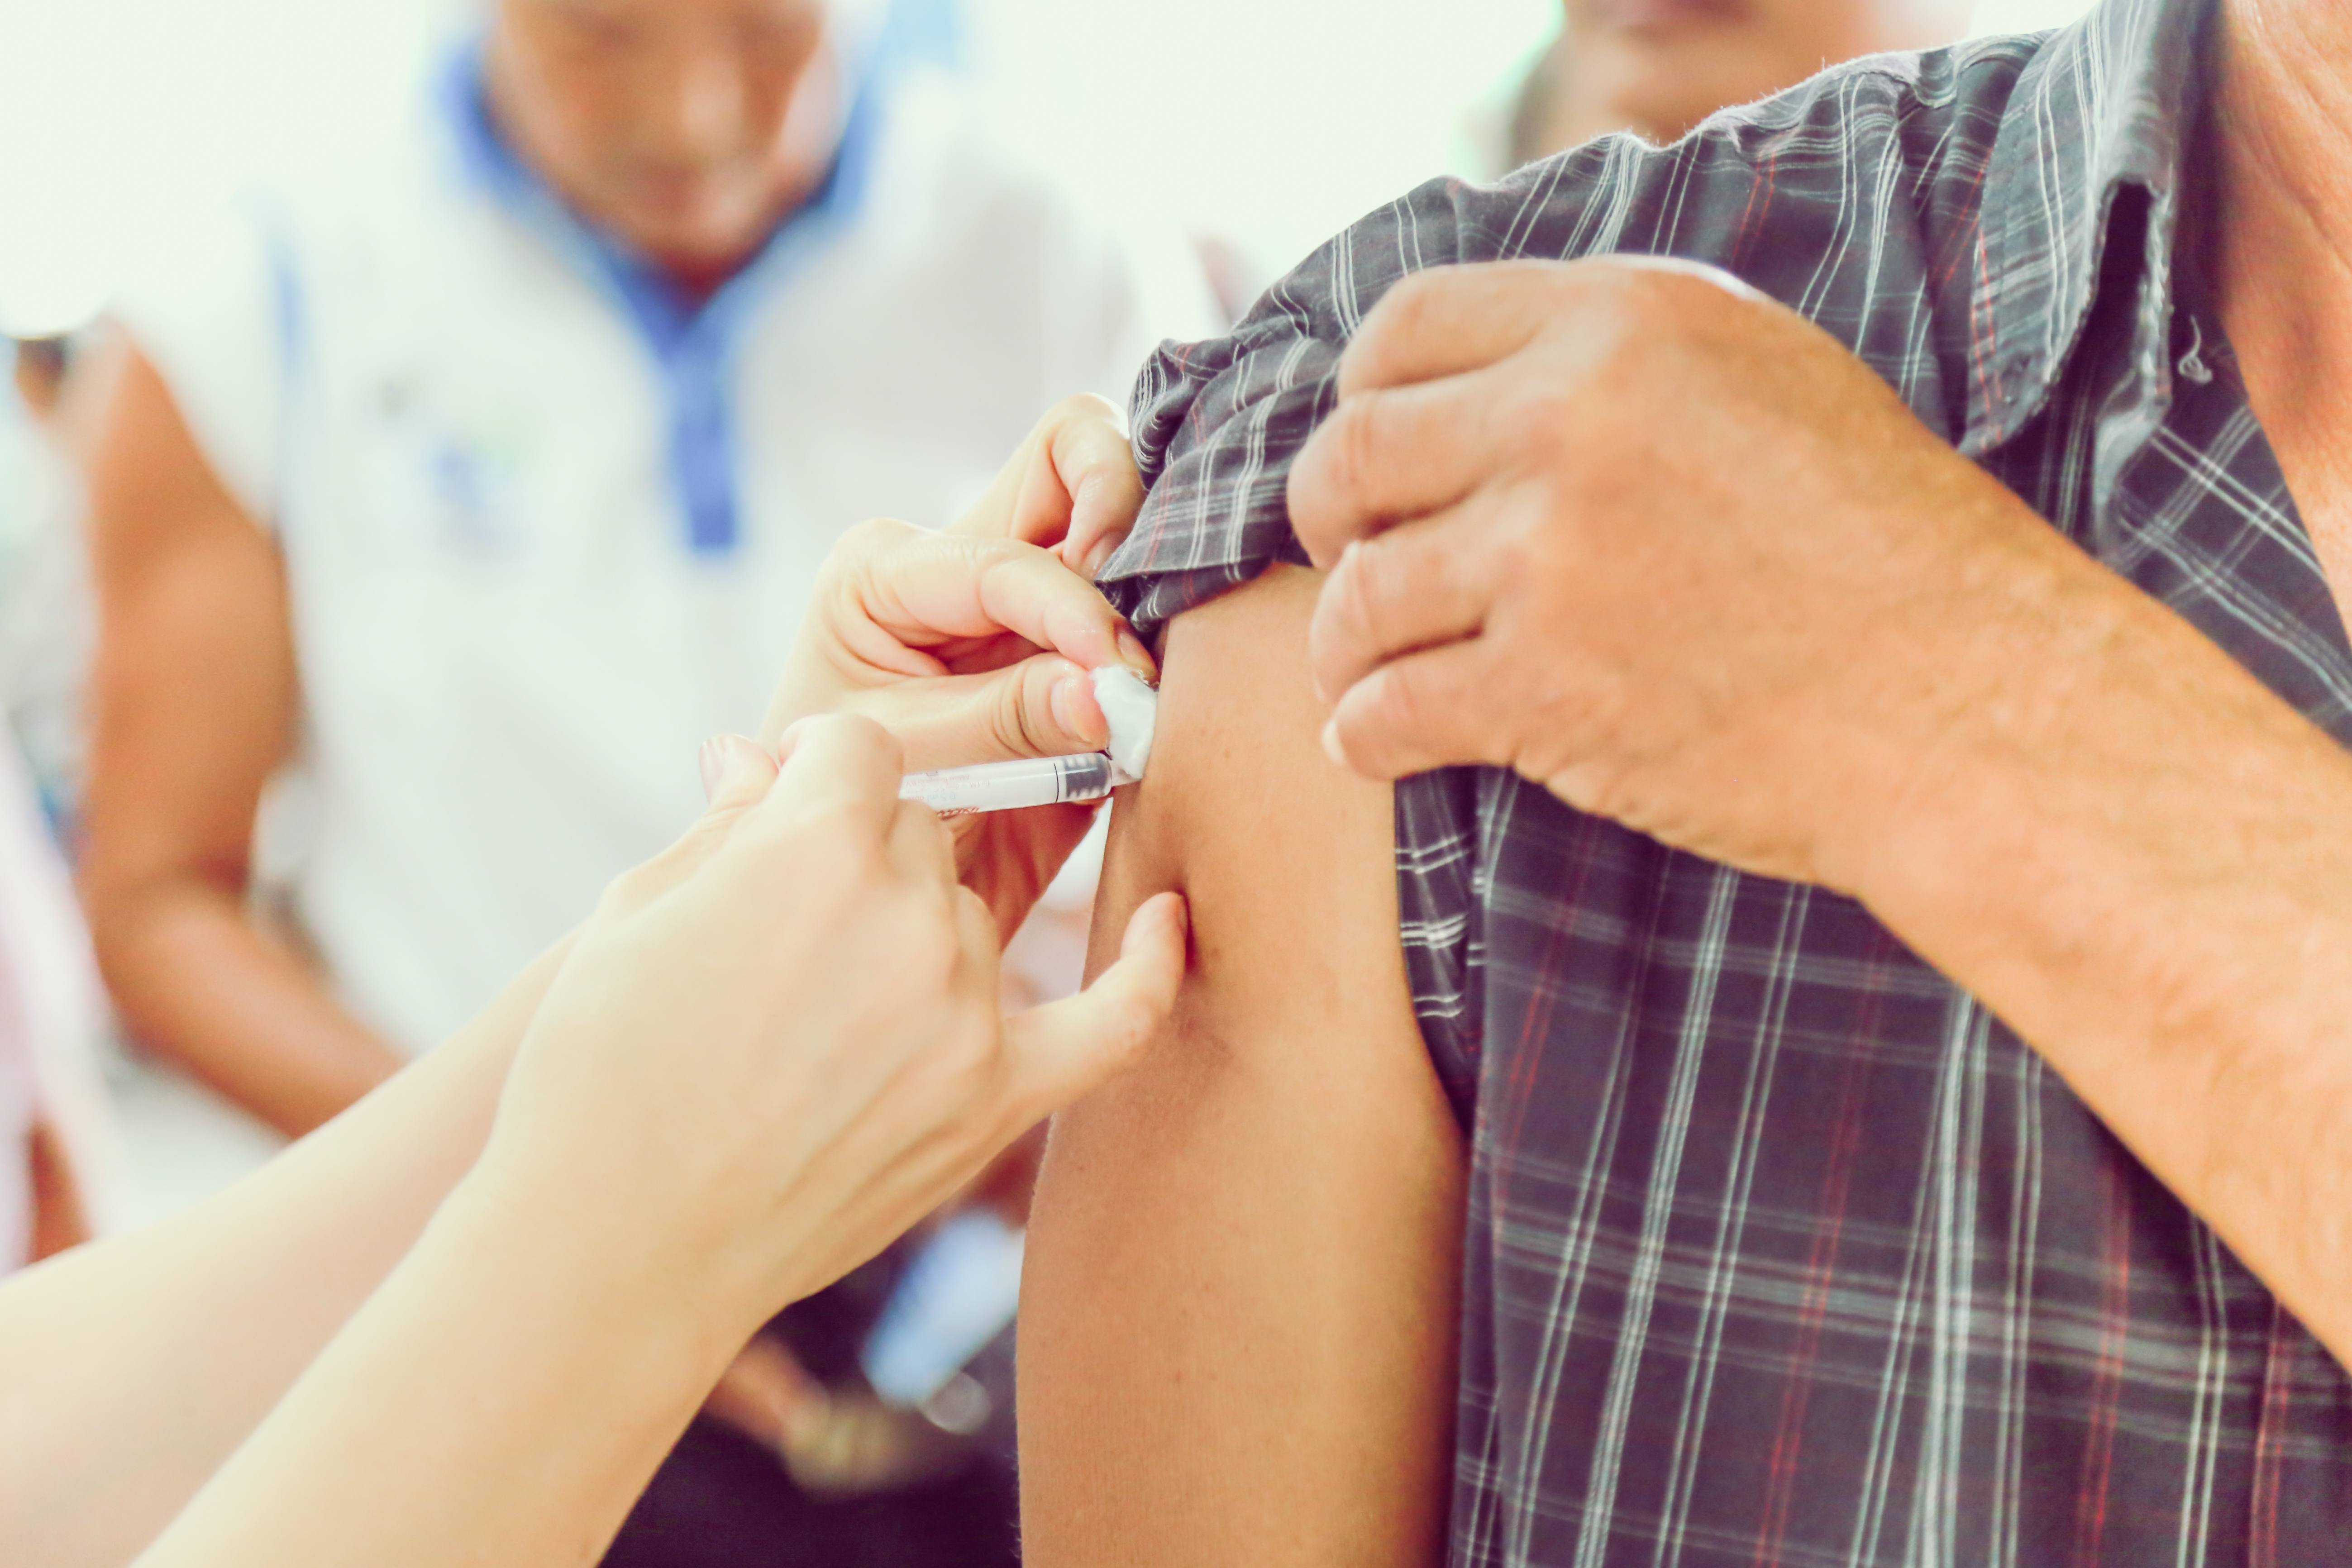 a person getting vaccinated by a healthcare person giving a flu shot